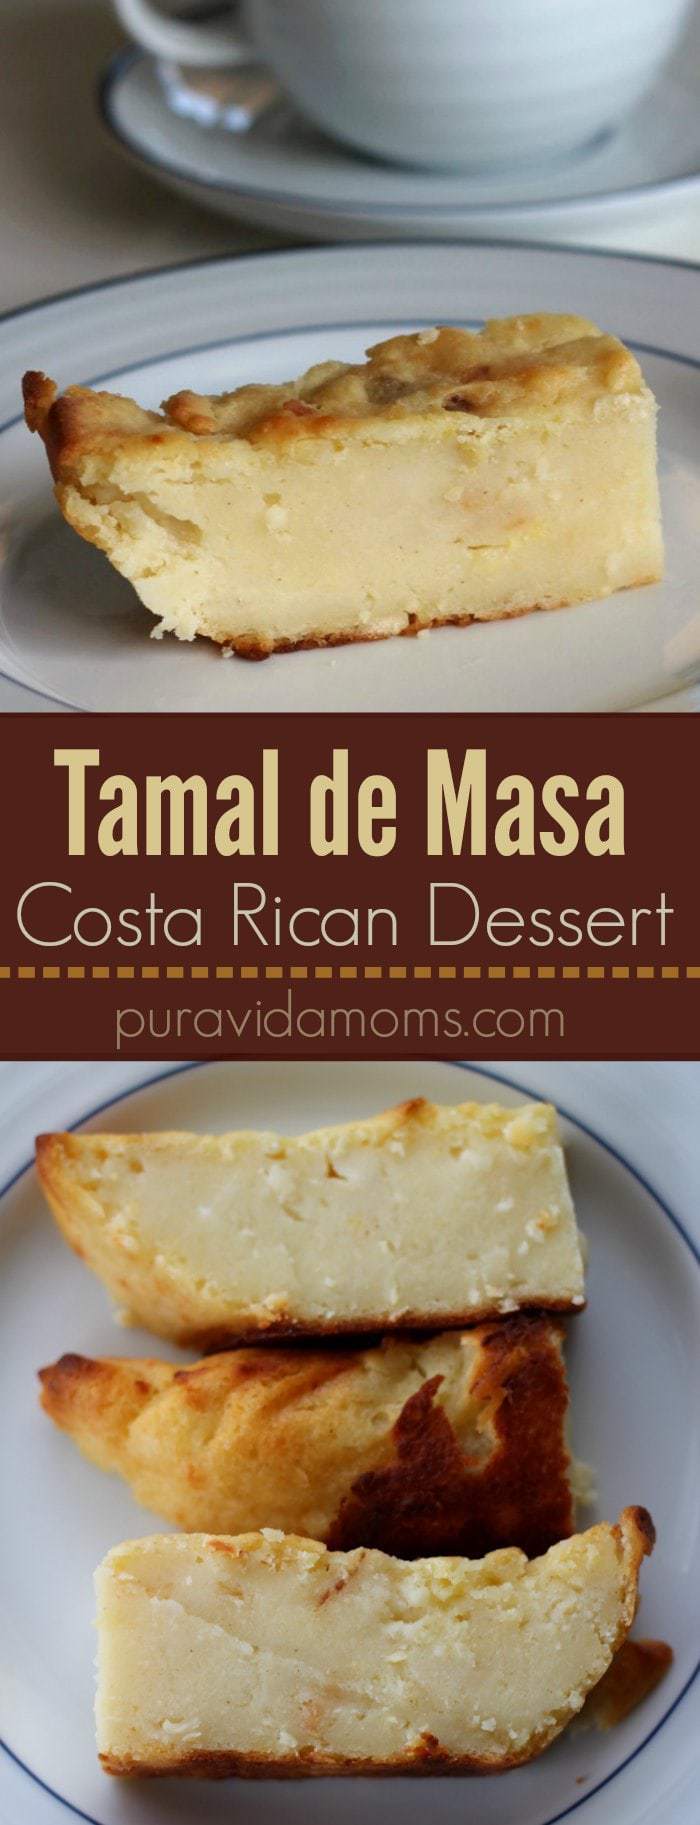 This gluten free Costa Rican tamal de masa dessert is slightly sweet with a unique texture. Traditionally served during Holy Week and at Christmas, the Costa Rican tamal de masa is the perfect complement to a steaming hot cup of coffee or agua dulce! #costarica #latinfood #latinrecipes #tamal #easter #holyweek #lent #vegetarian #dessert 